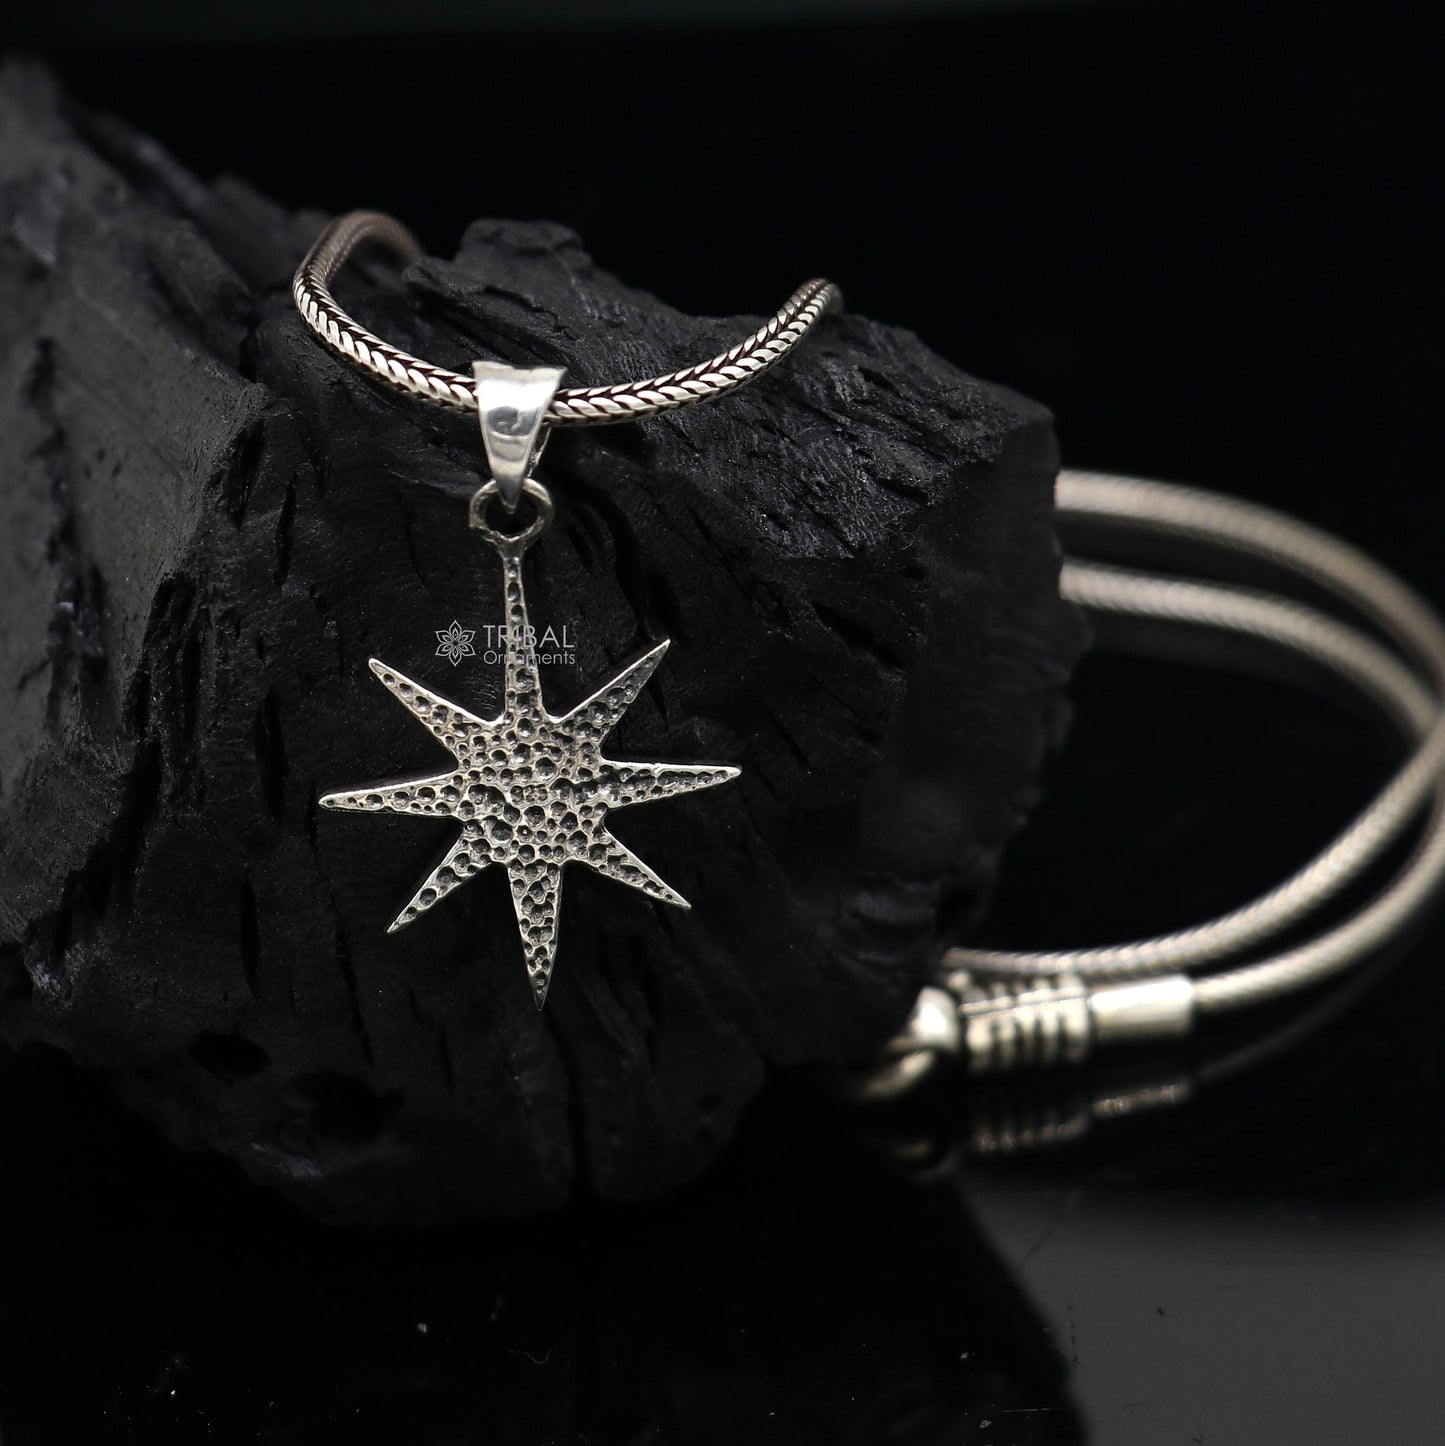 Stylish 925 sterling silver handmade Star design pendant, high quality silver small pendant for boy girls nsp672 - TRIBAL ORNAMENTS